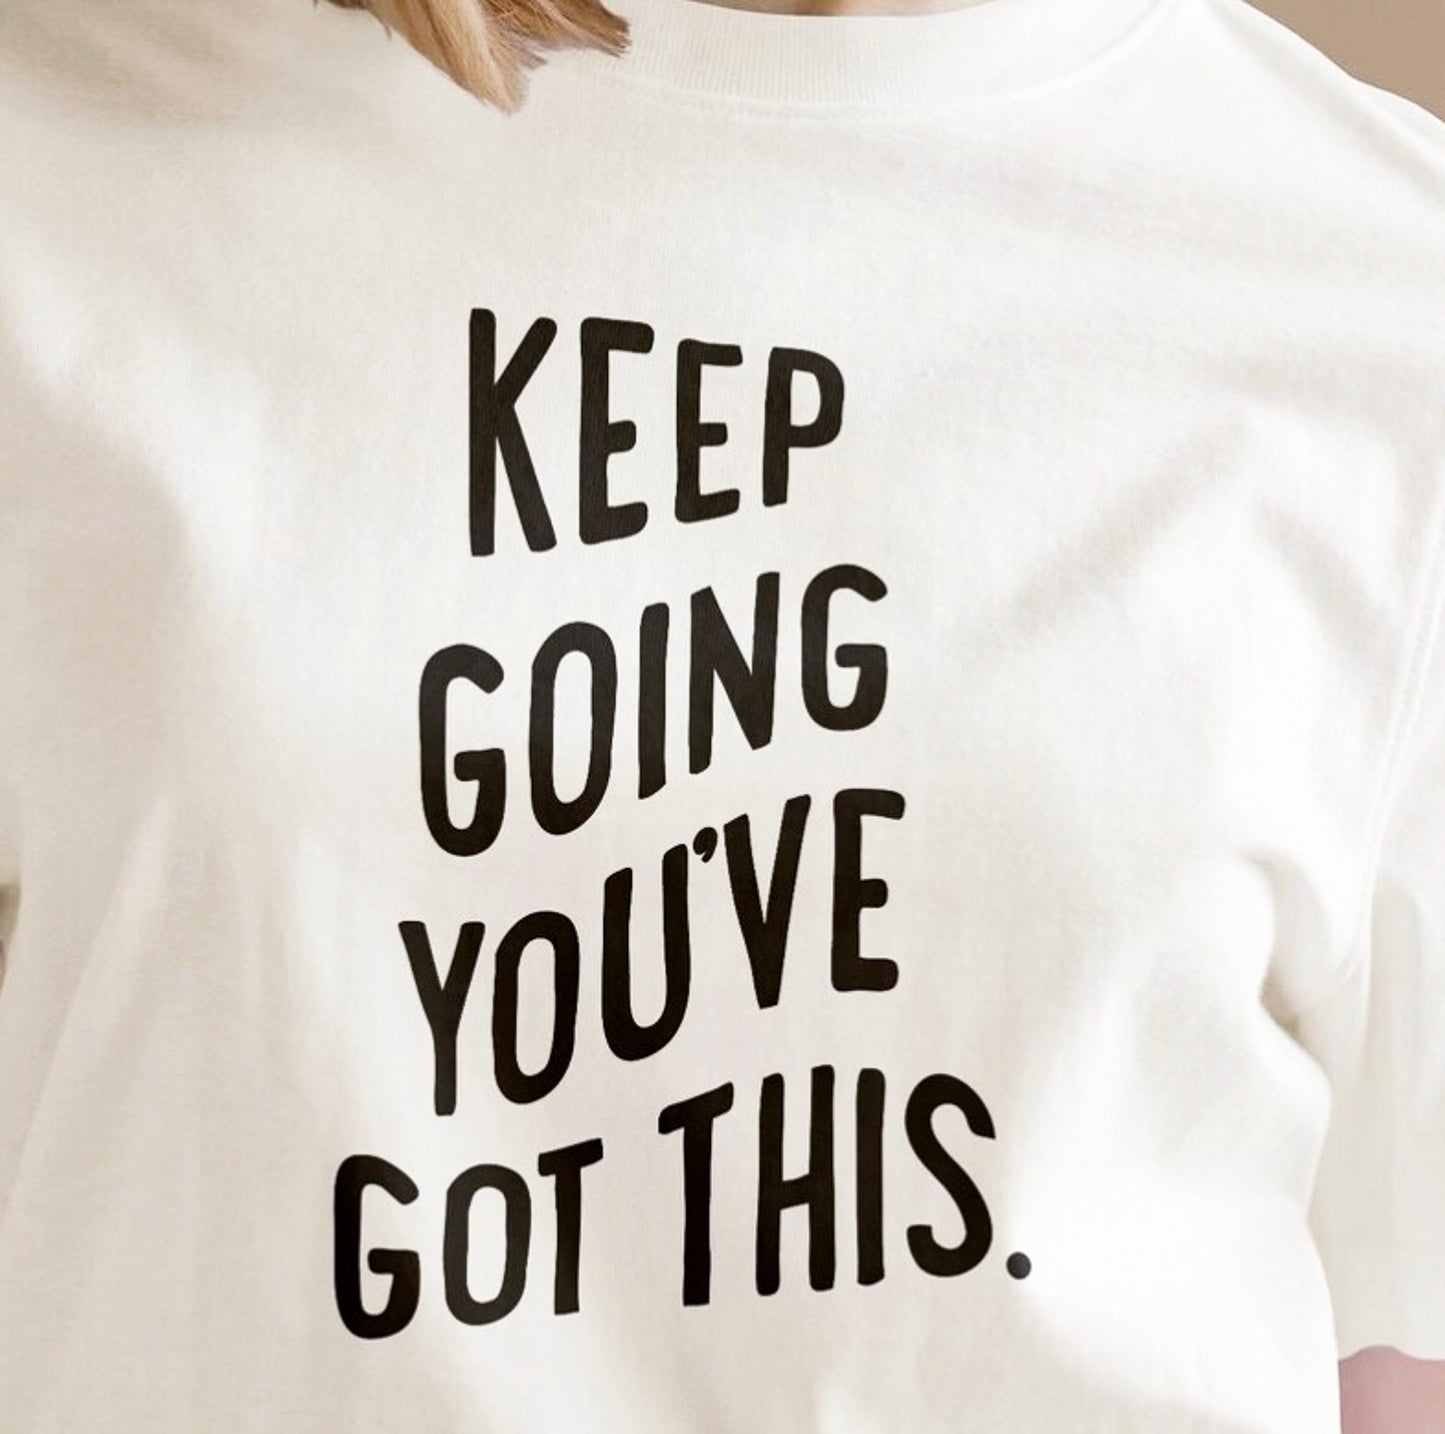 Keep Going You've Got This Tee